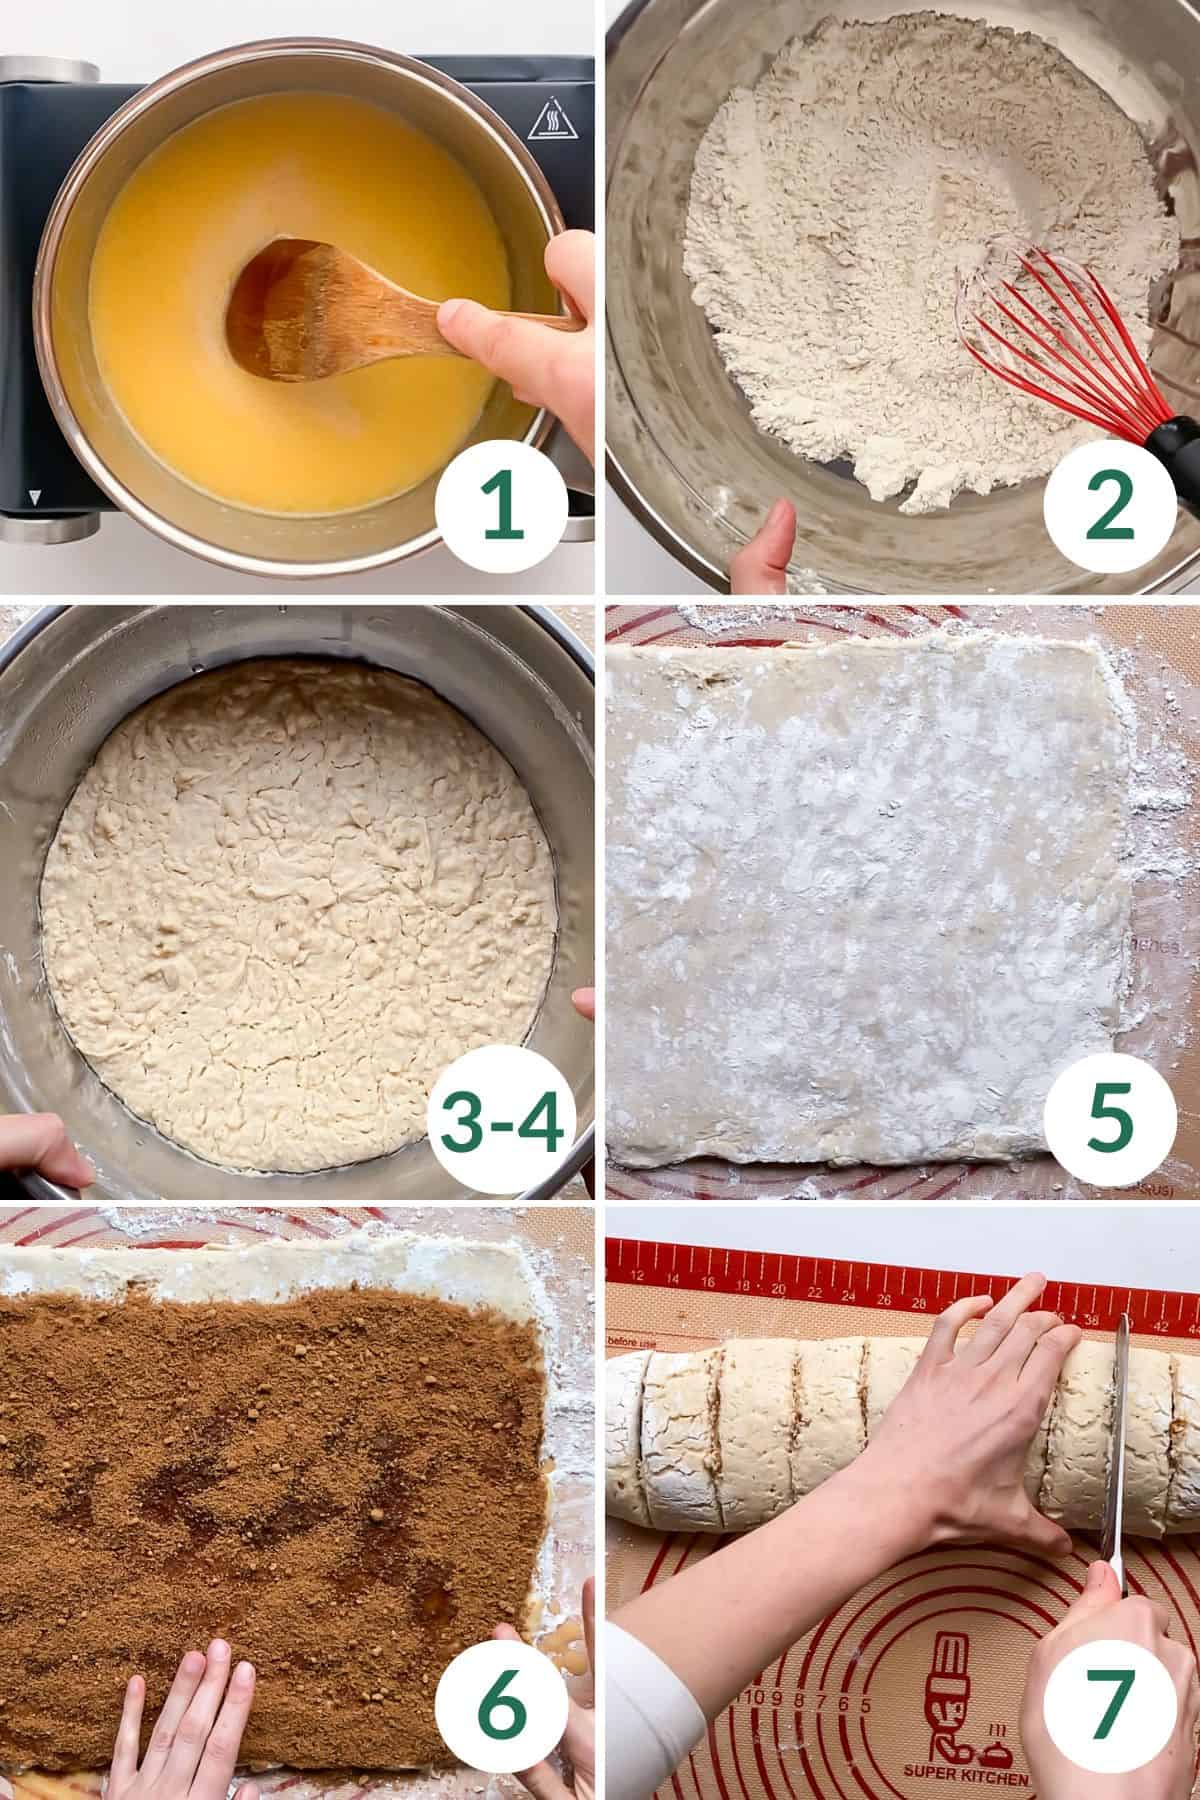 Steps 1-7 to make this recipe, including mixing the wet and dry ingredients, letting the yeast dough rise, and rolling and filling the cinnamon rolls.